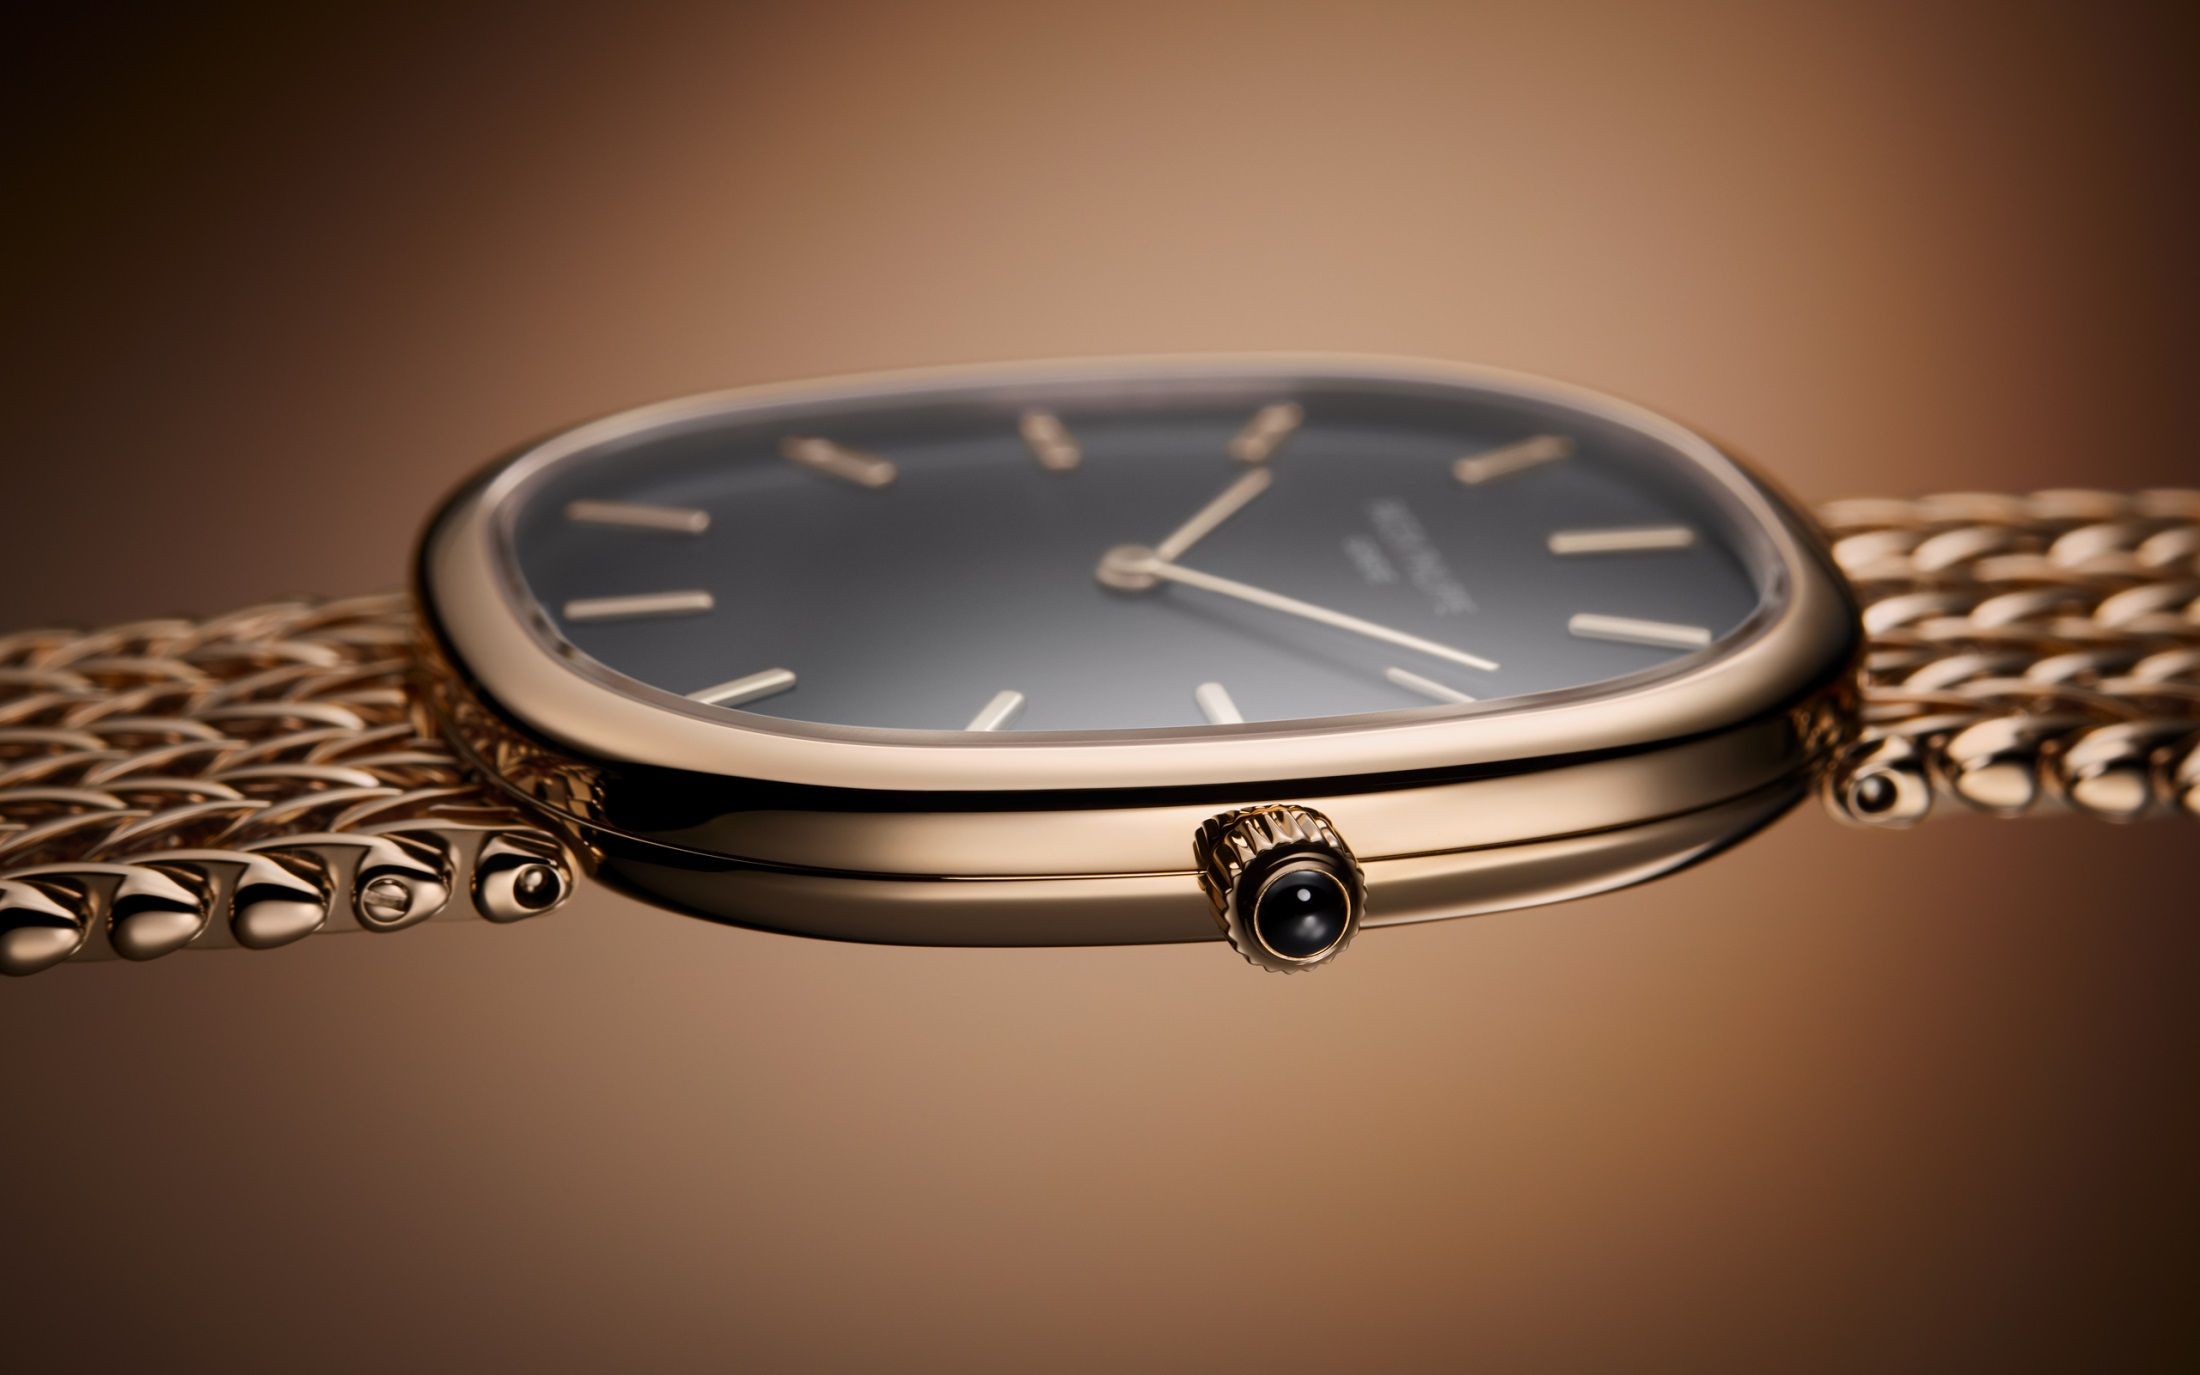 The ultra-thin timepiece is powered by the self-winding micro-rotor caliber 240